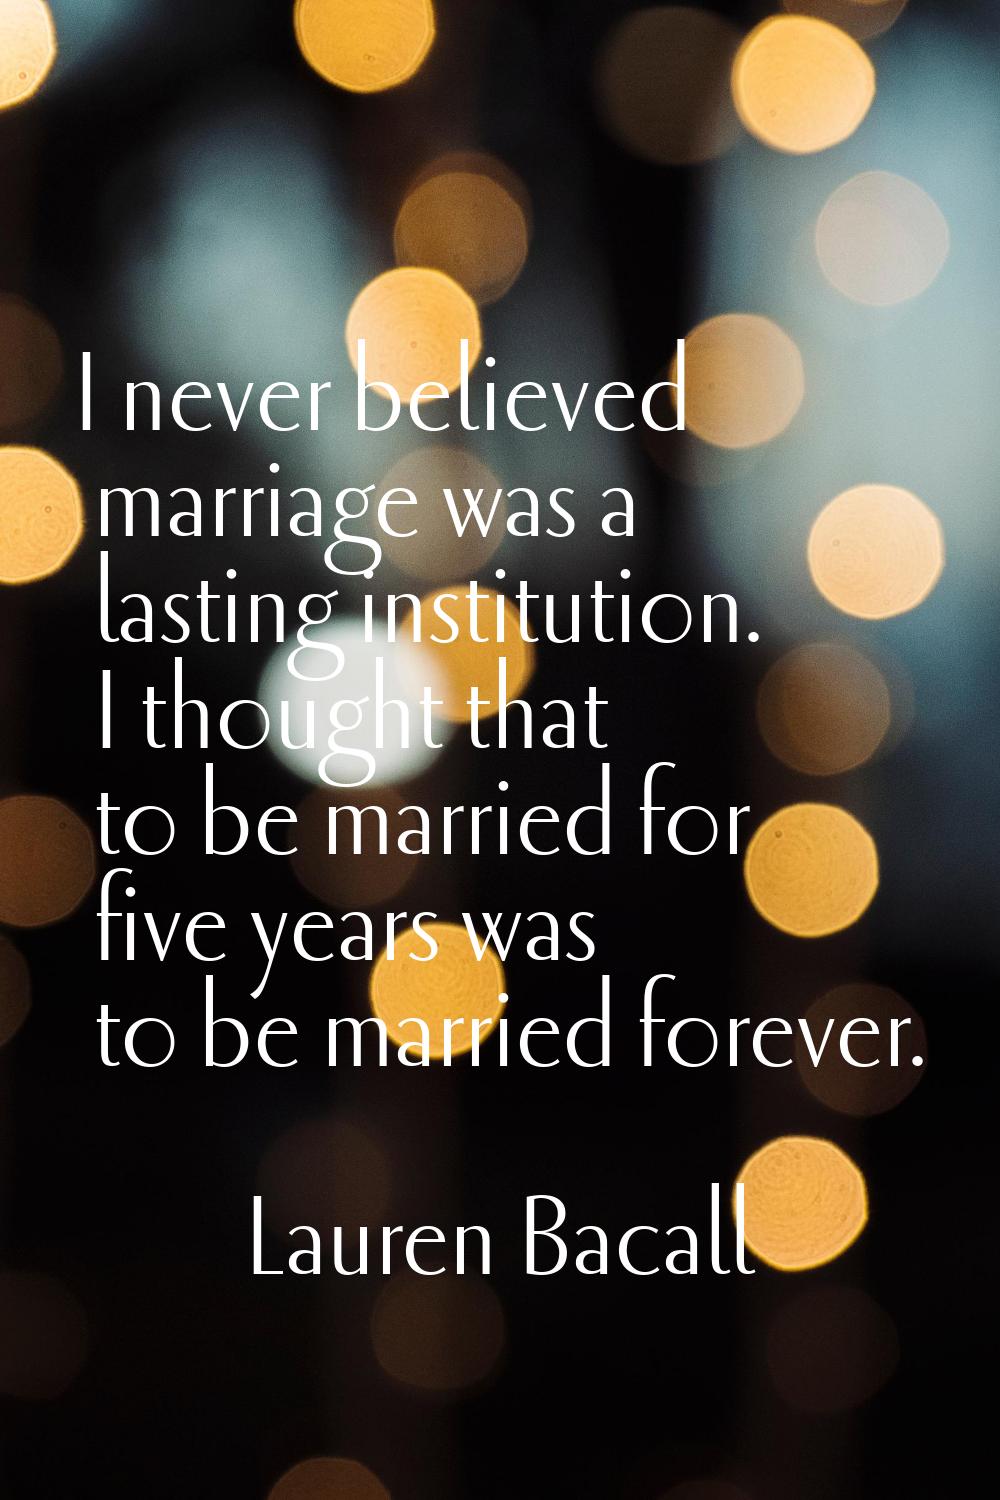 I never believed marriage was a lasting institution. I thought that to be married for five years wa